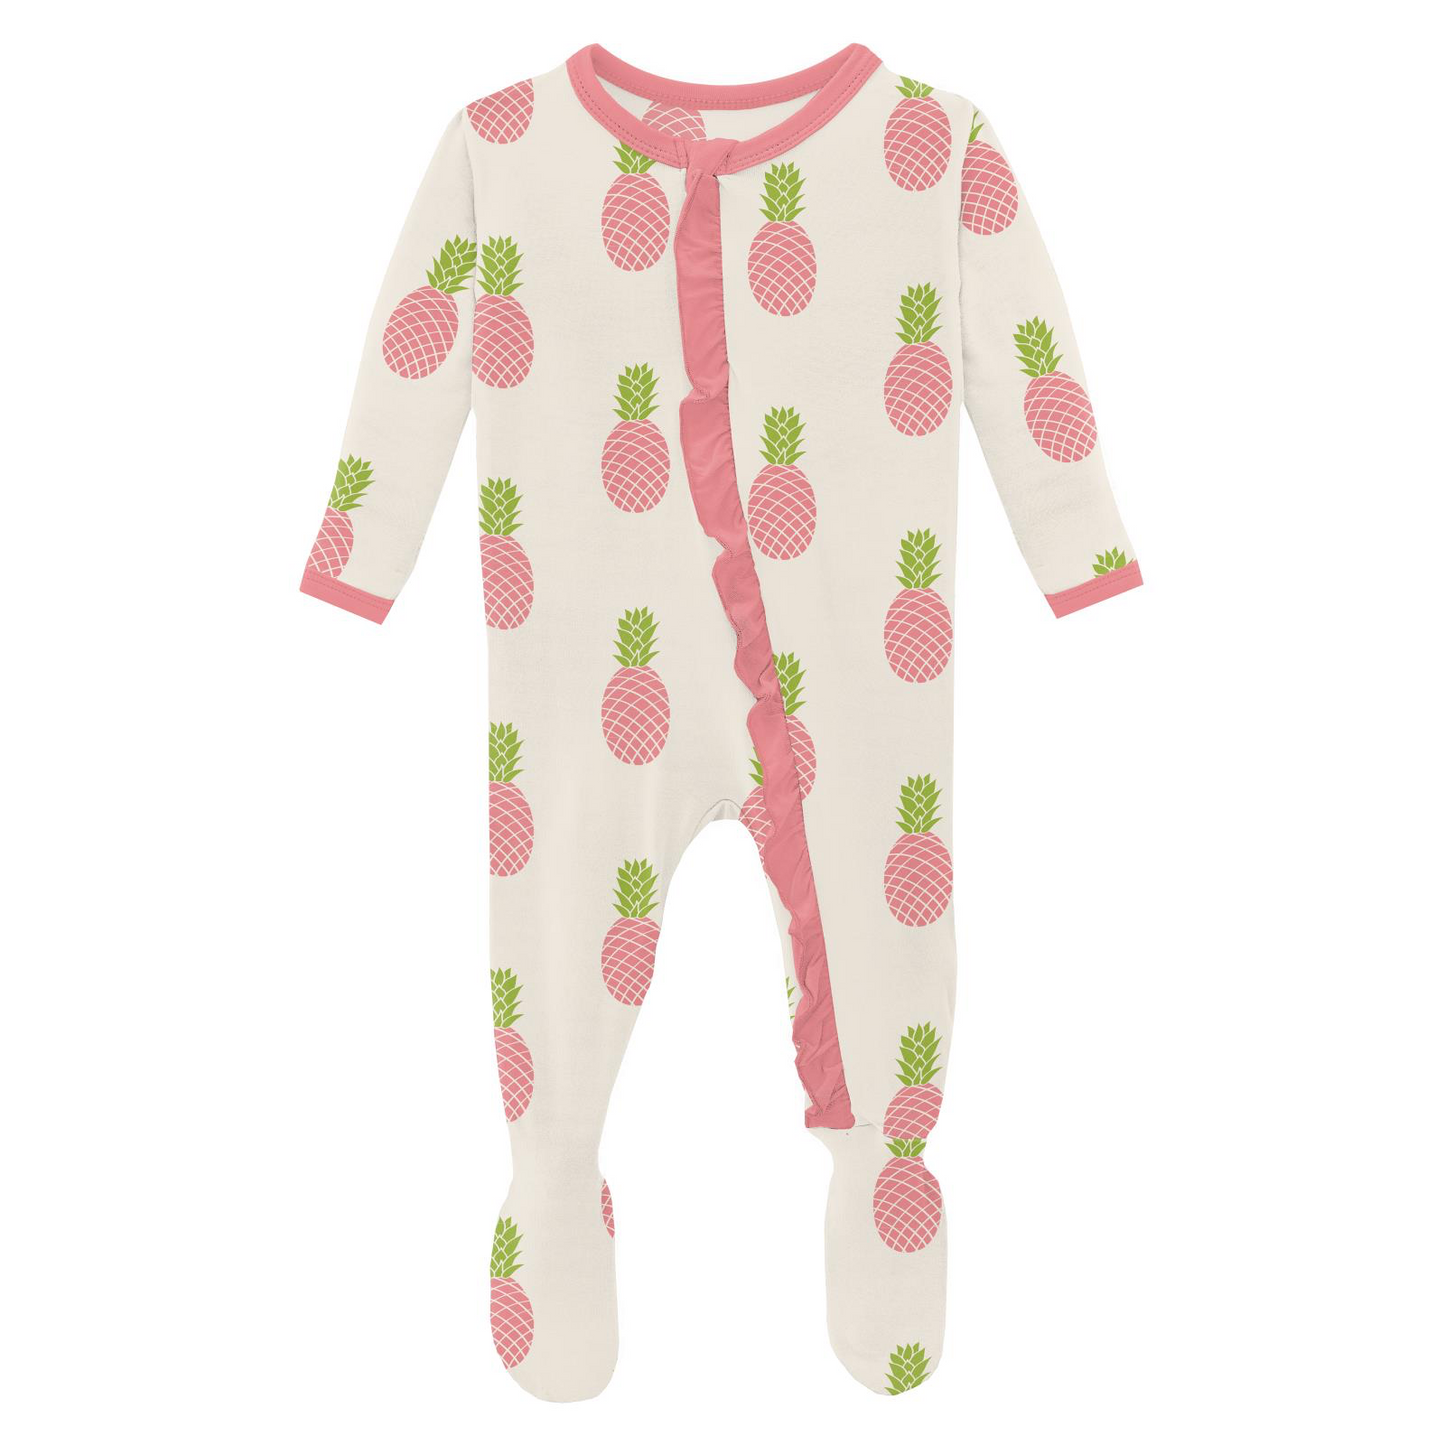 Print Classic Ruffle Footie with Zipper in Strawberry Pineapple